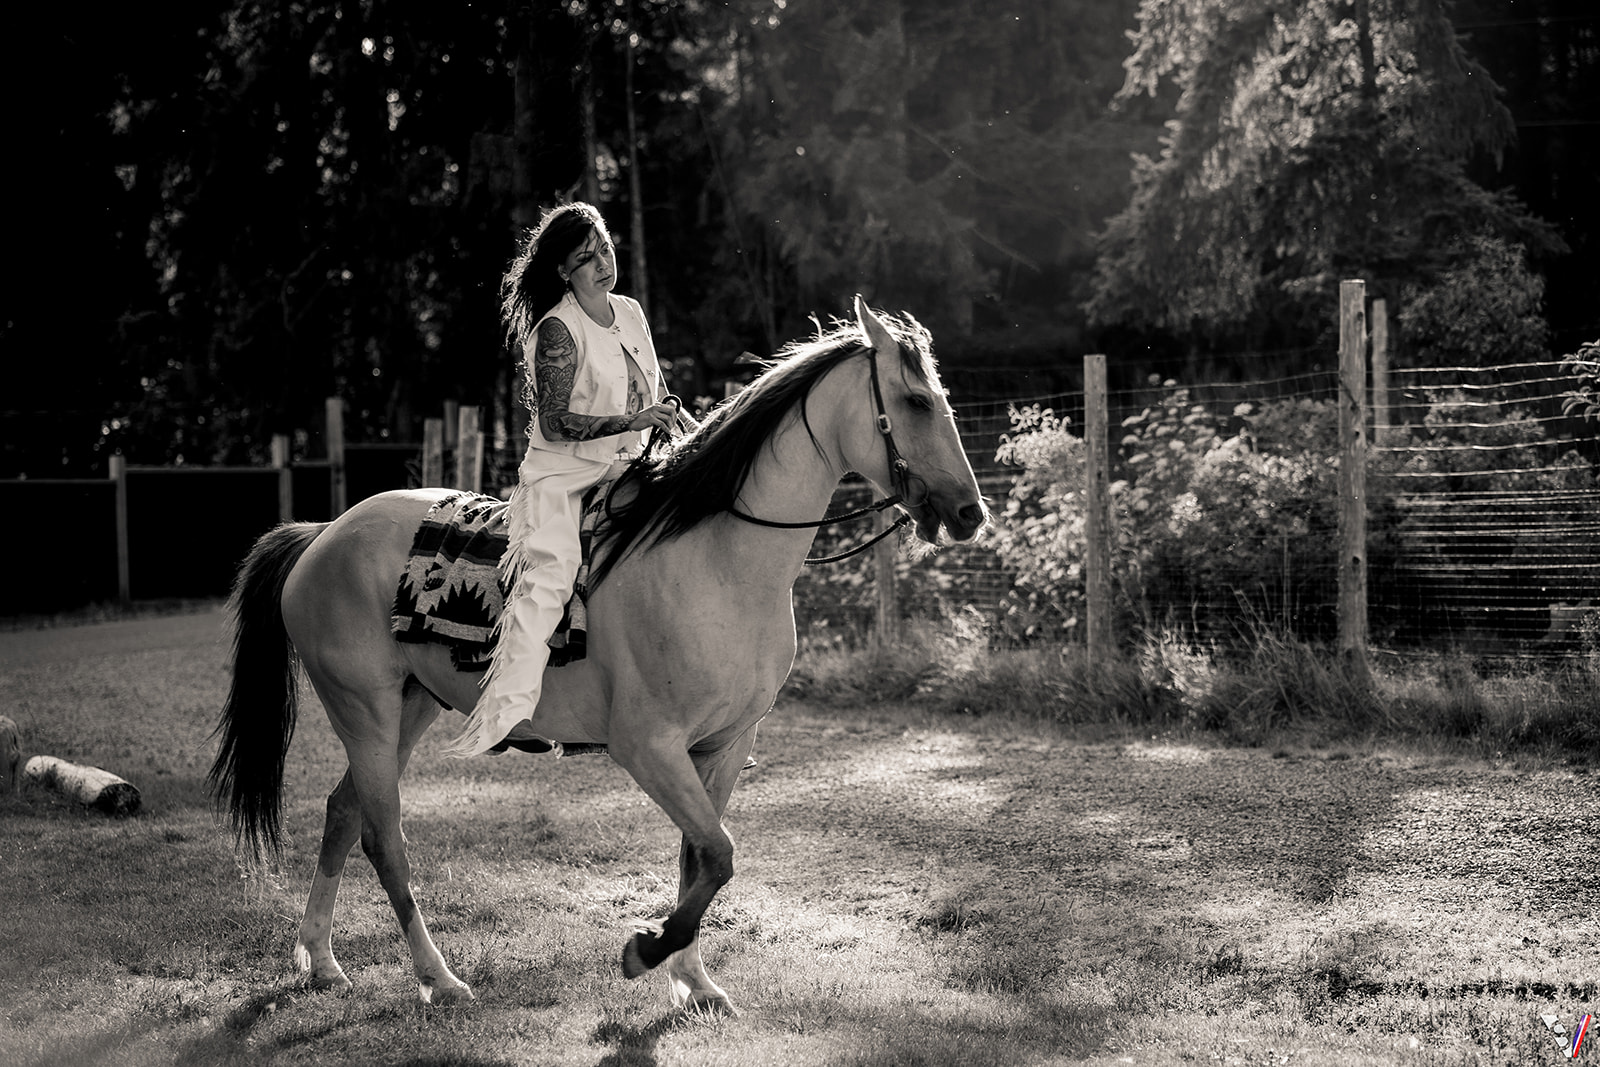 Behind the scenes: The art of capturing equine elegance in photography.